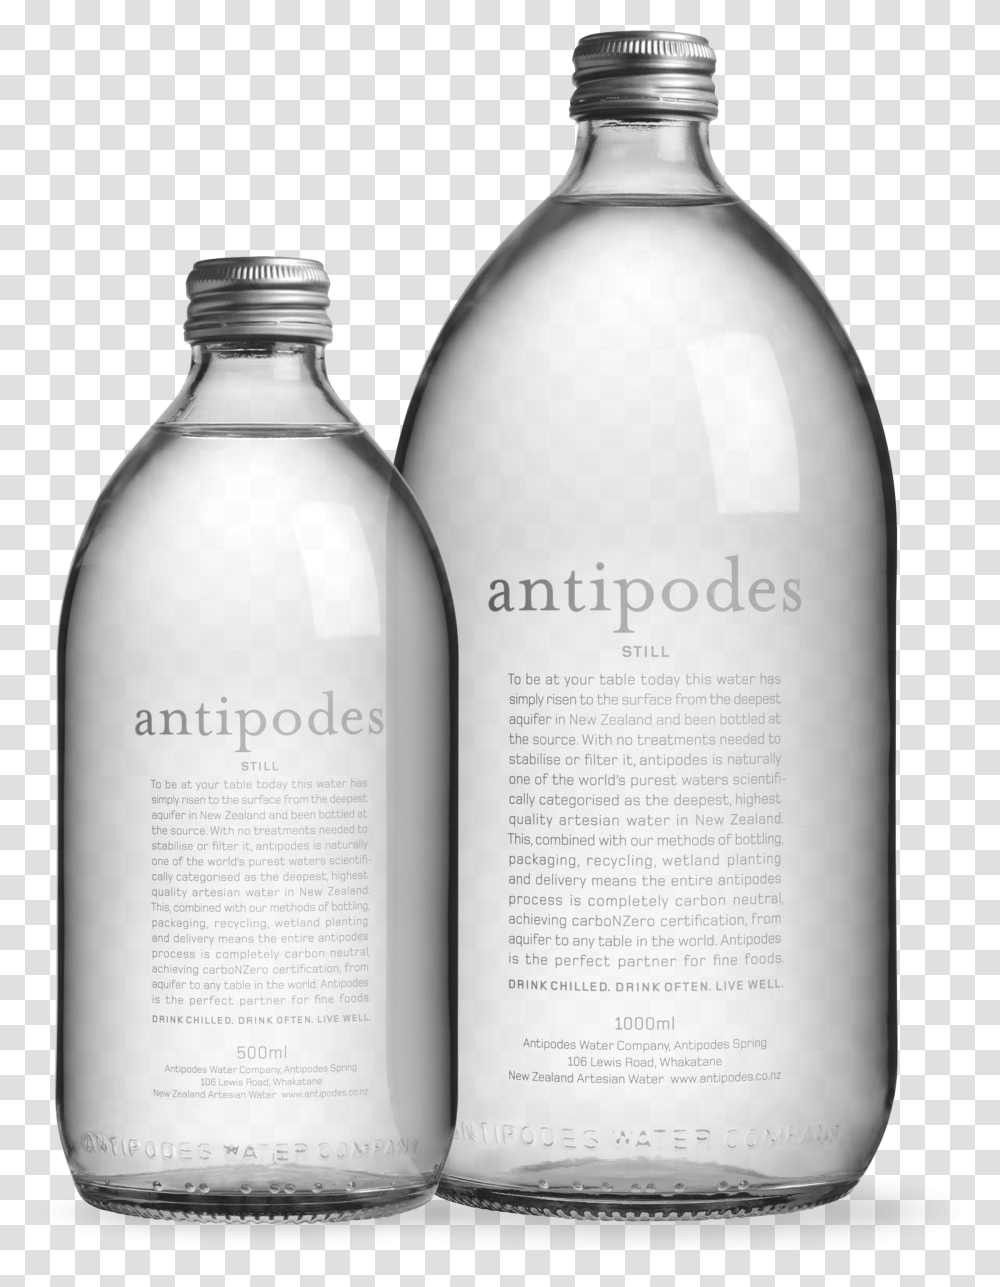 Antipodes Water Glass Bottle Transparent Png